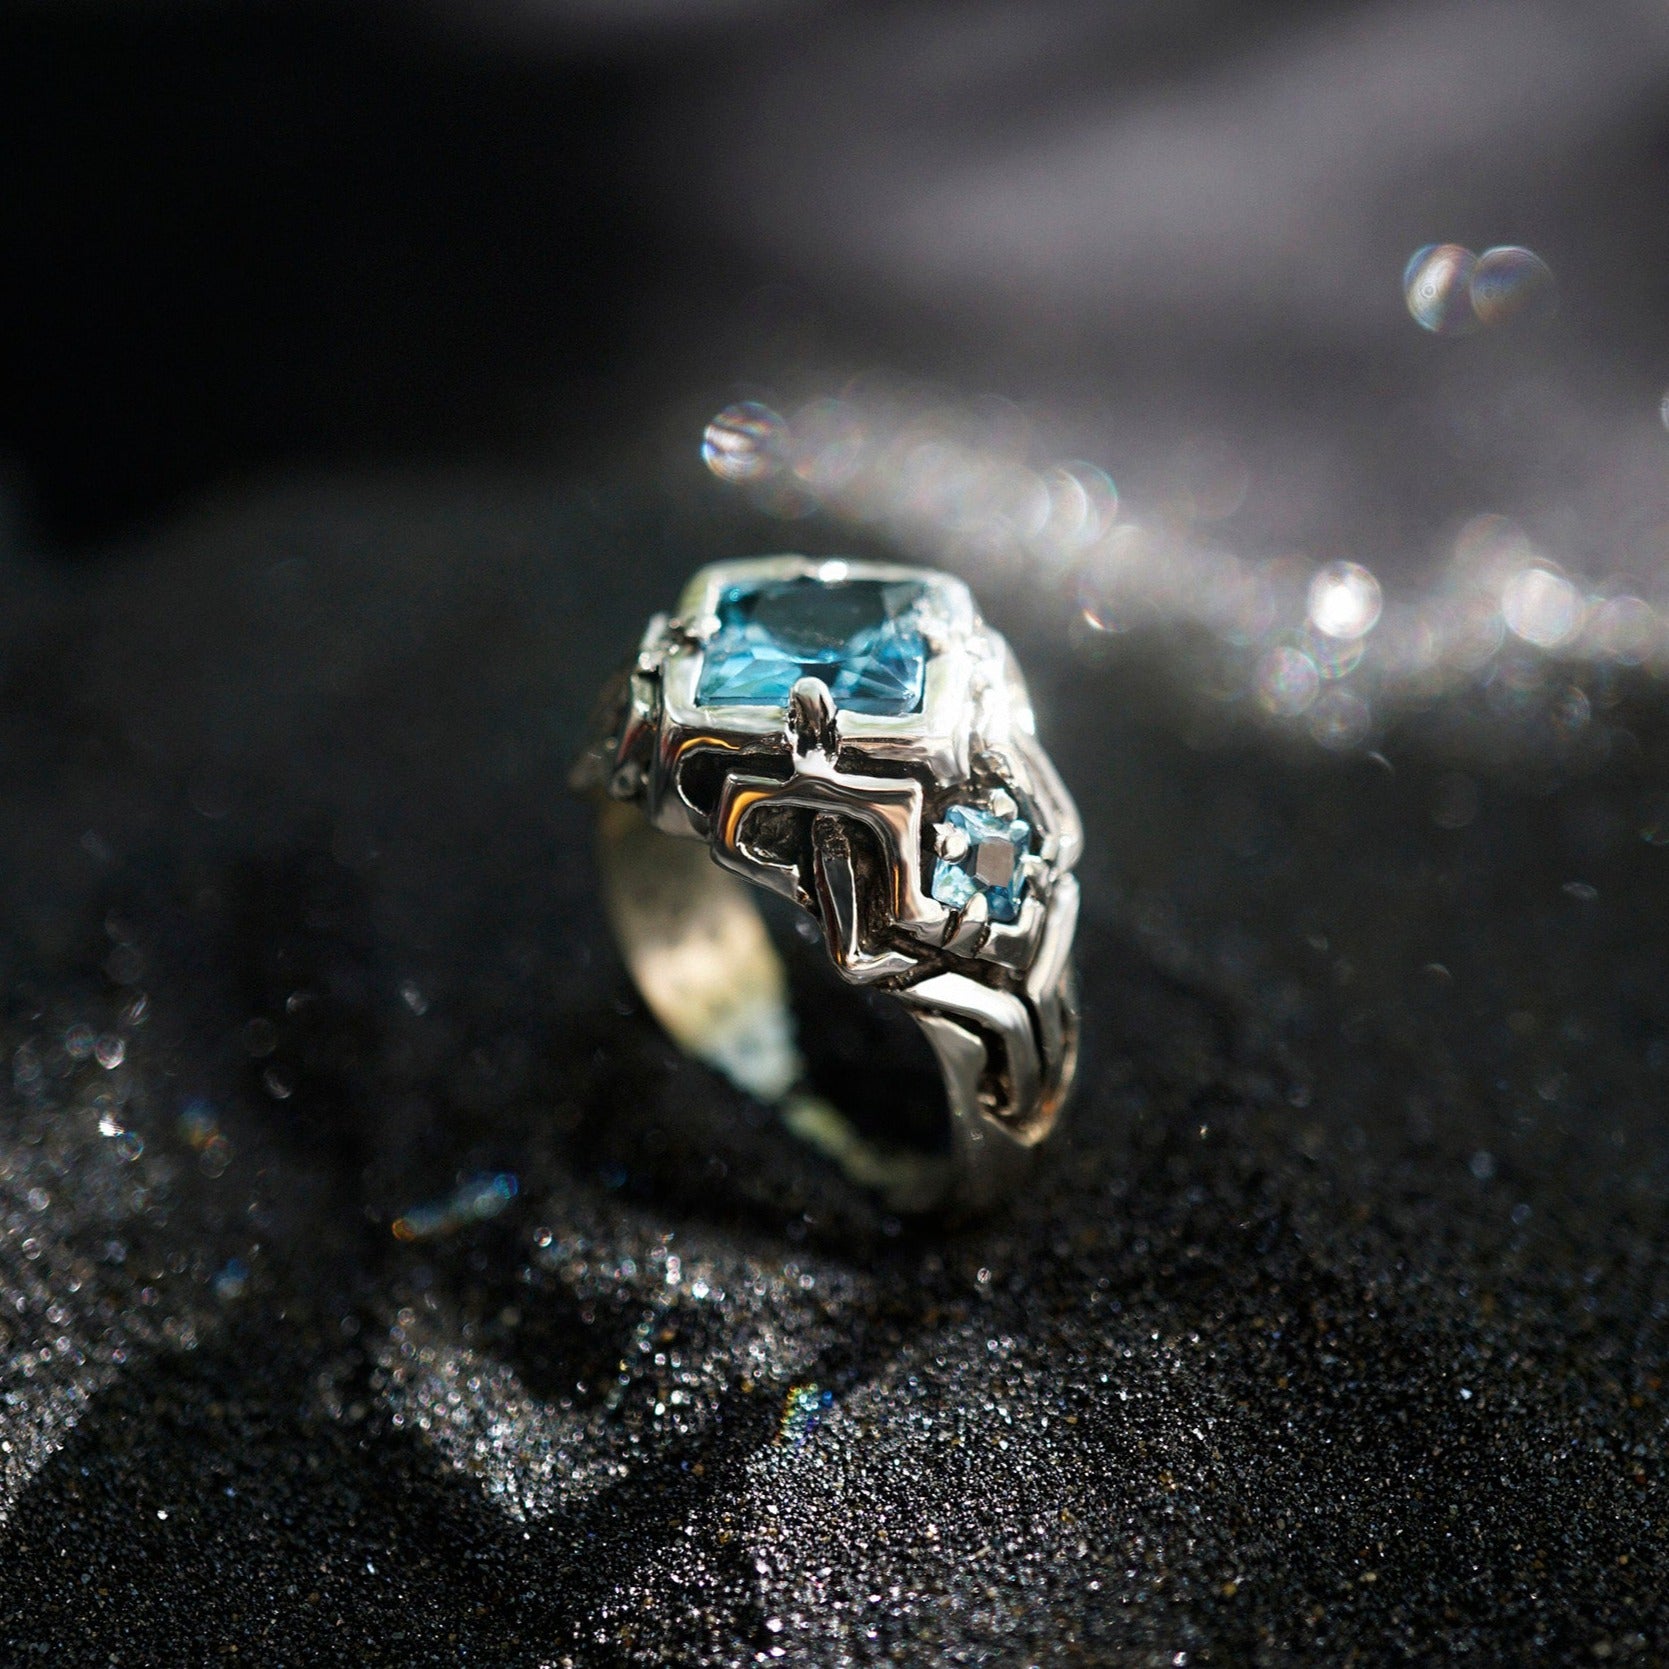 London Blue Topaz engagement ring, sterling silver, unique cyberpunk ring 